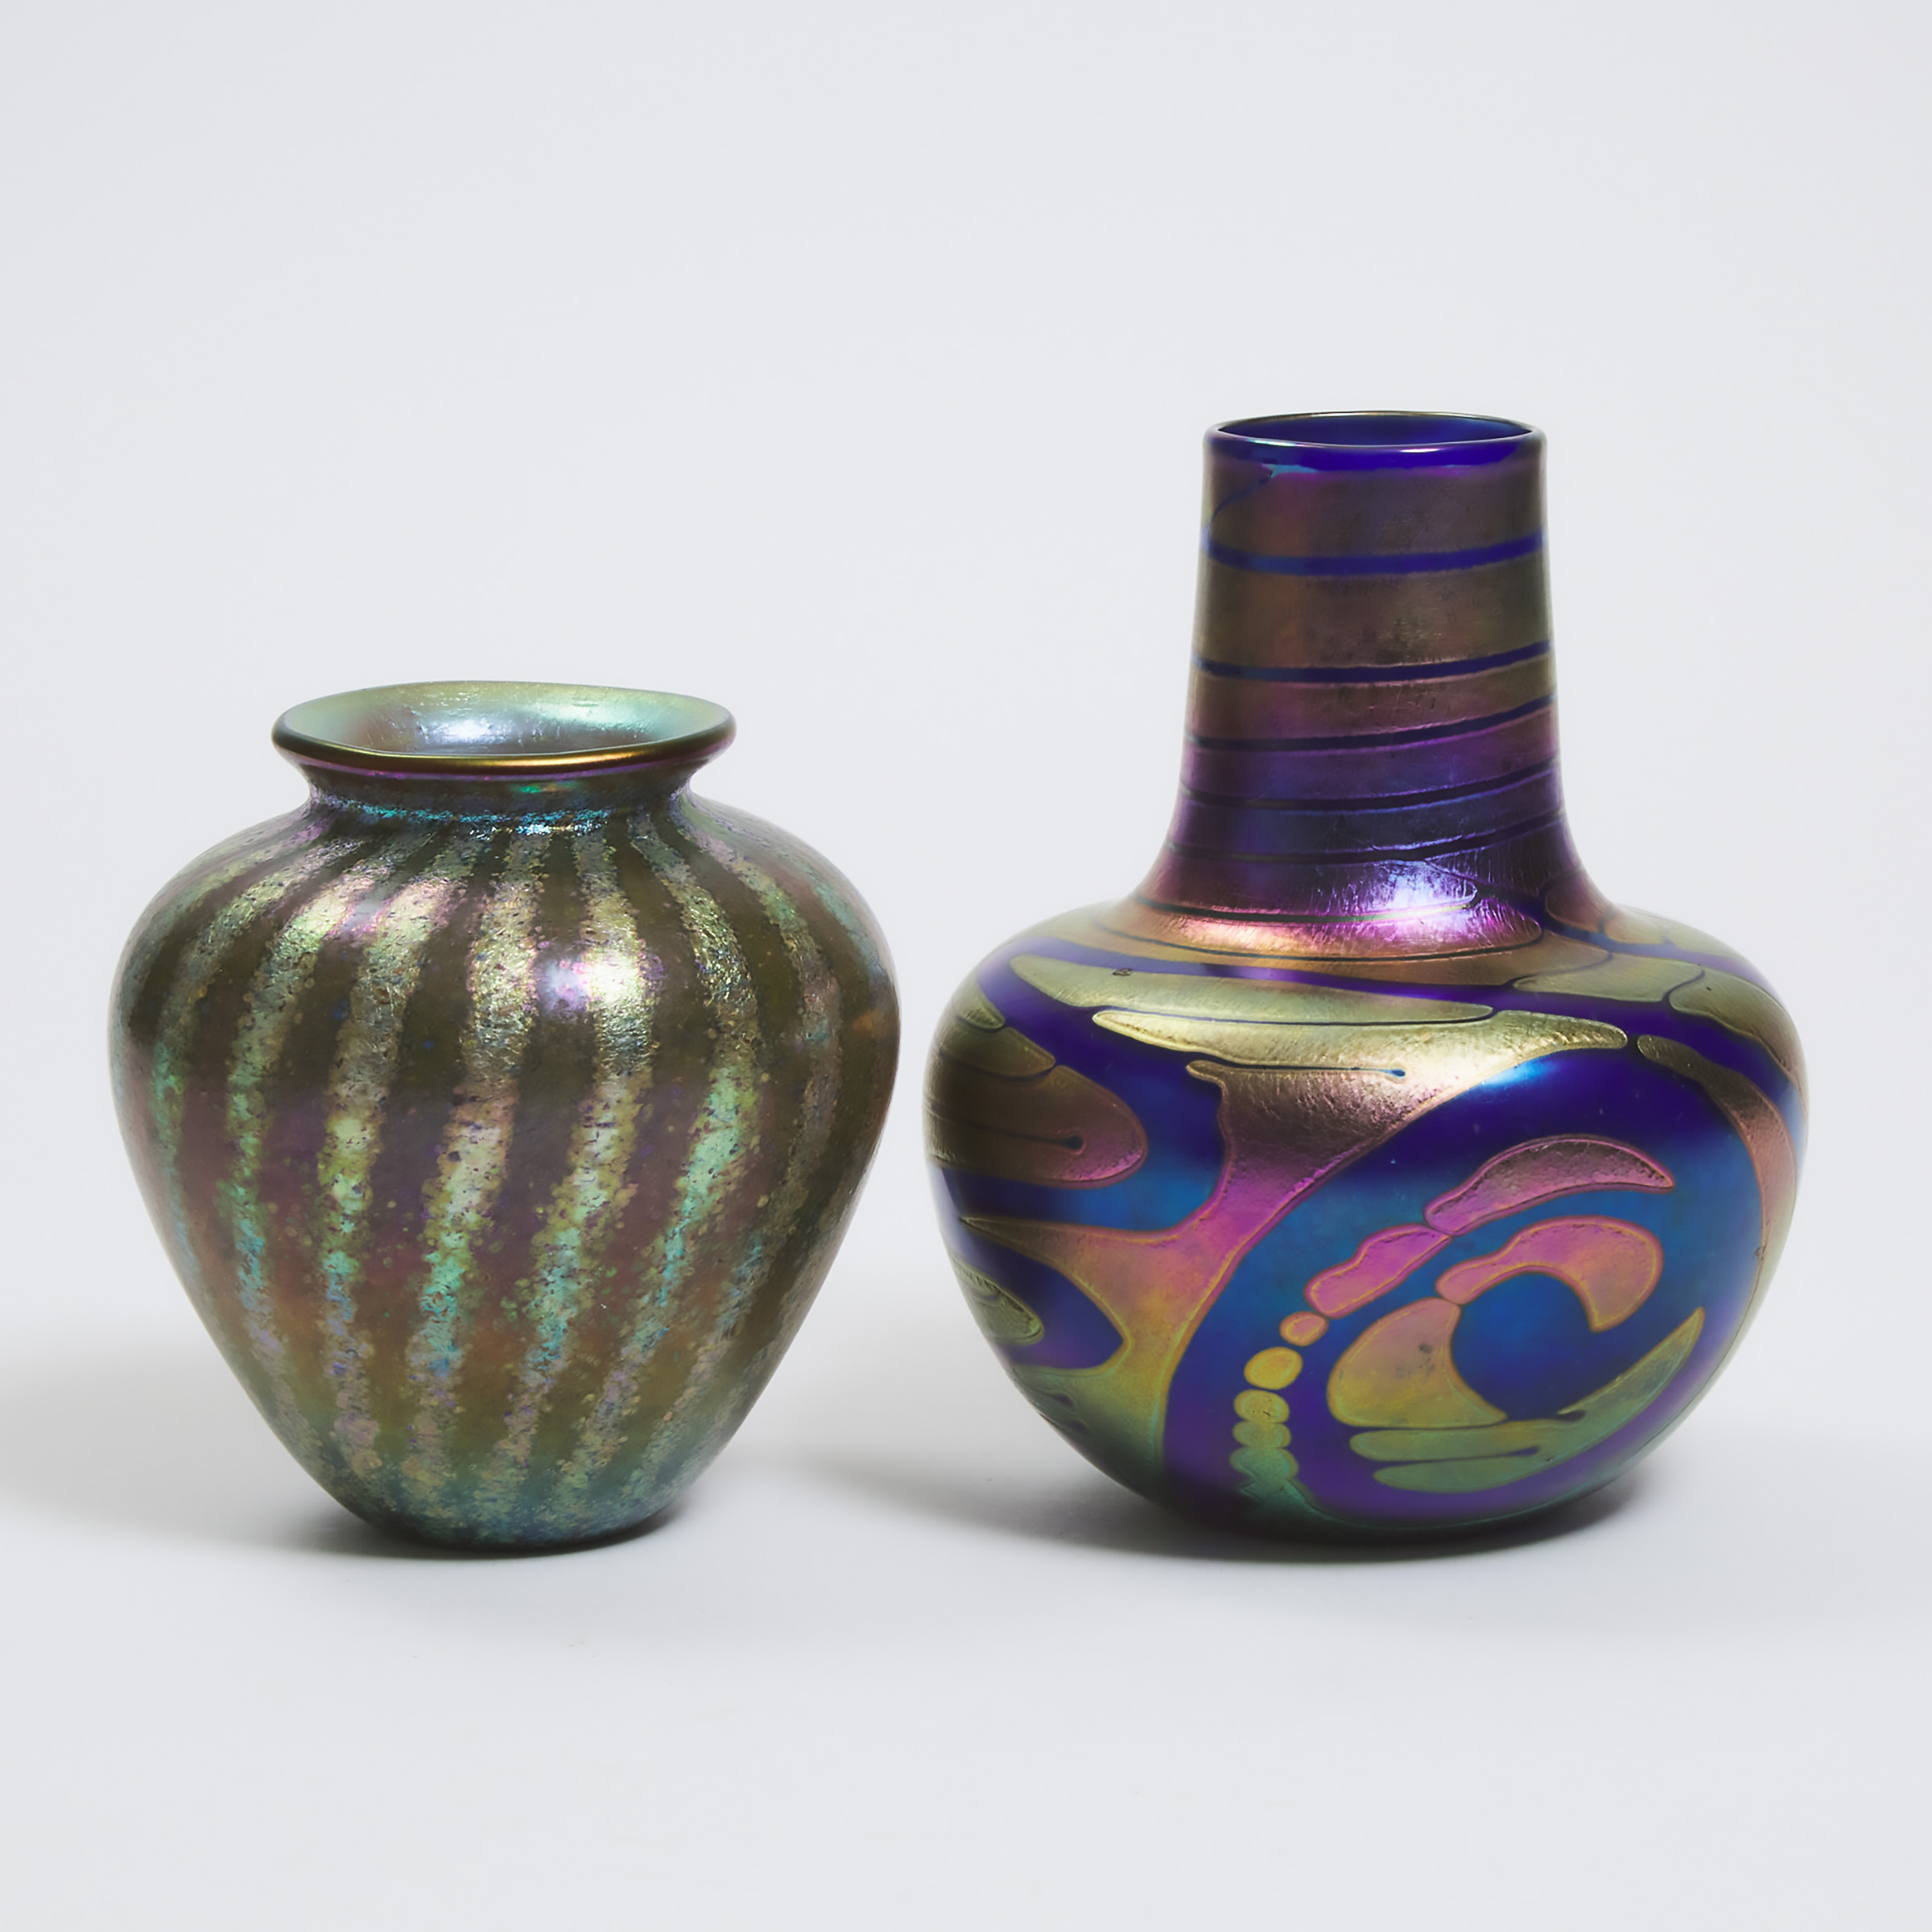 Two Canadian Iridescent Glass Vases  28c0d6